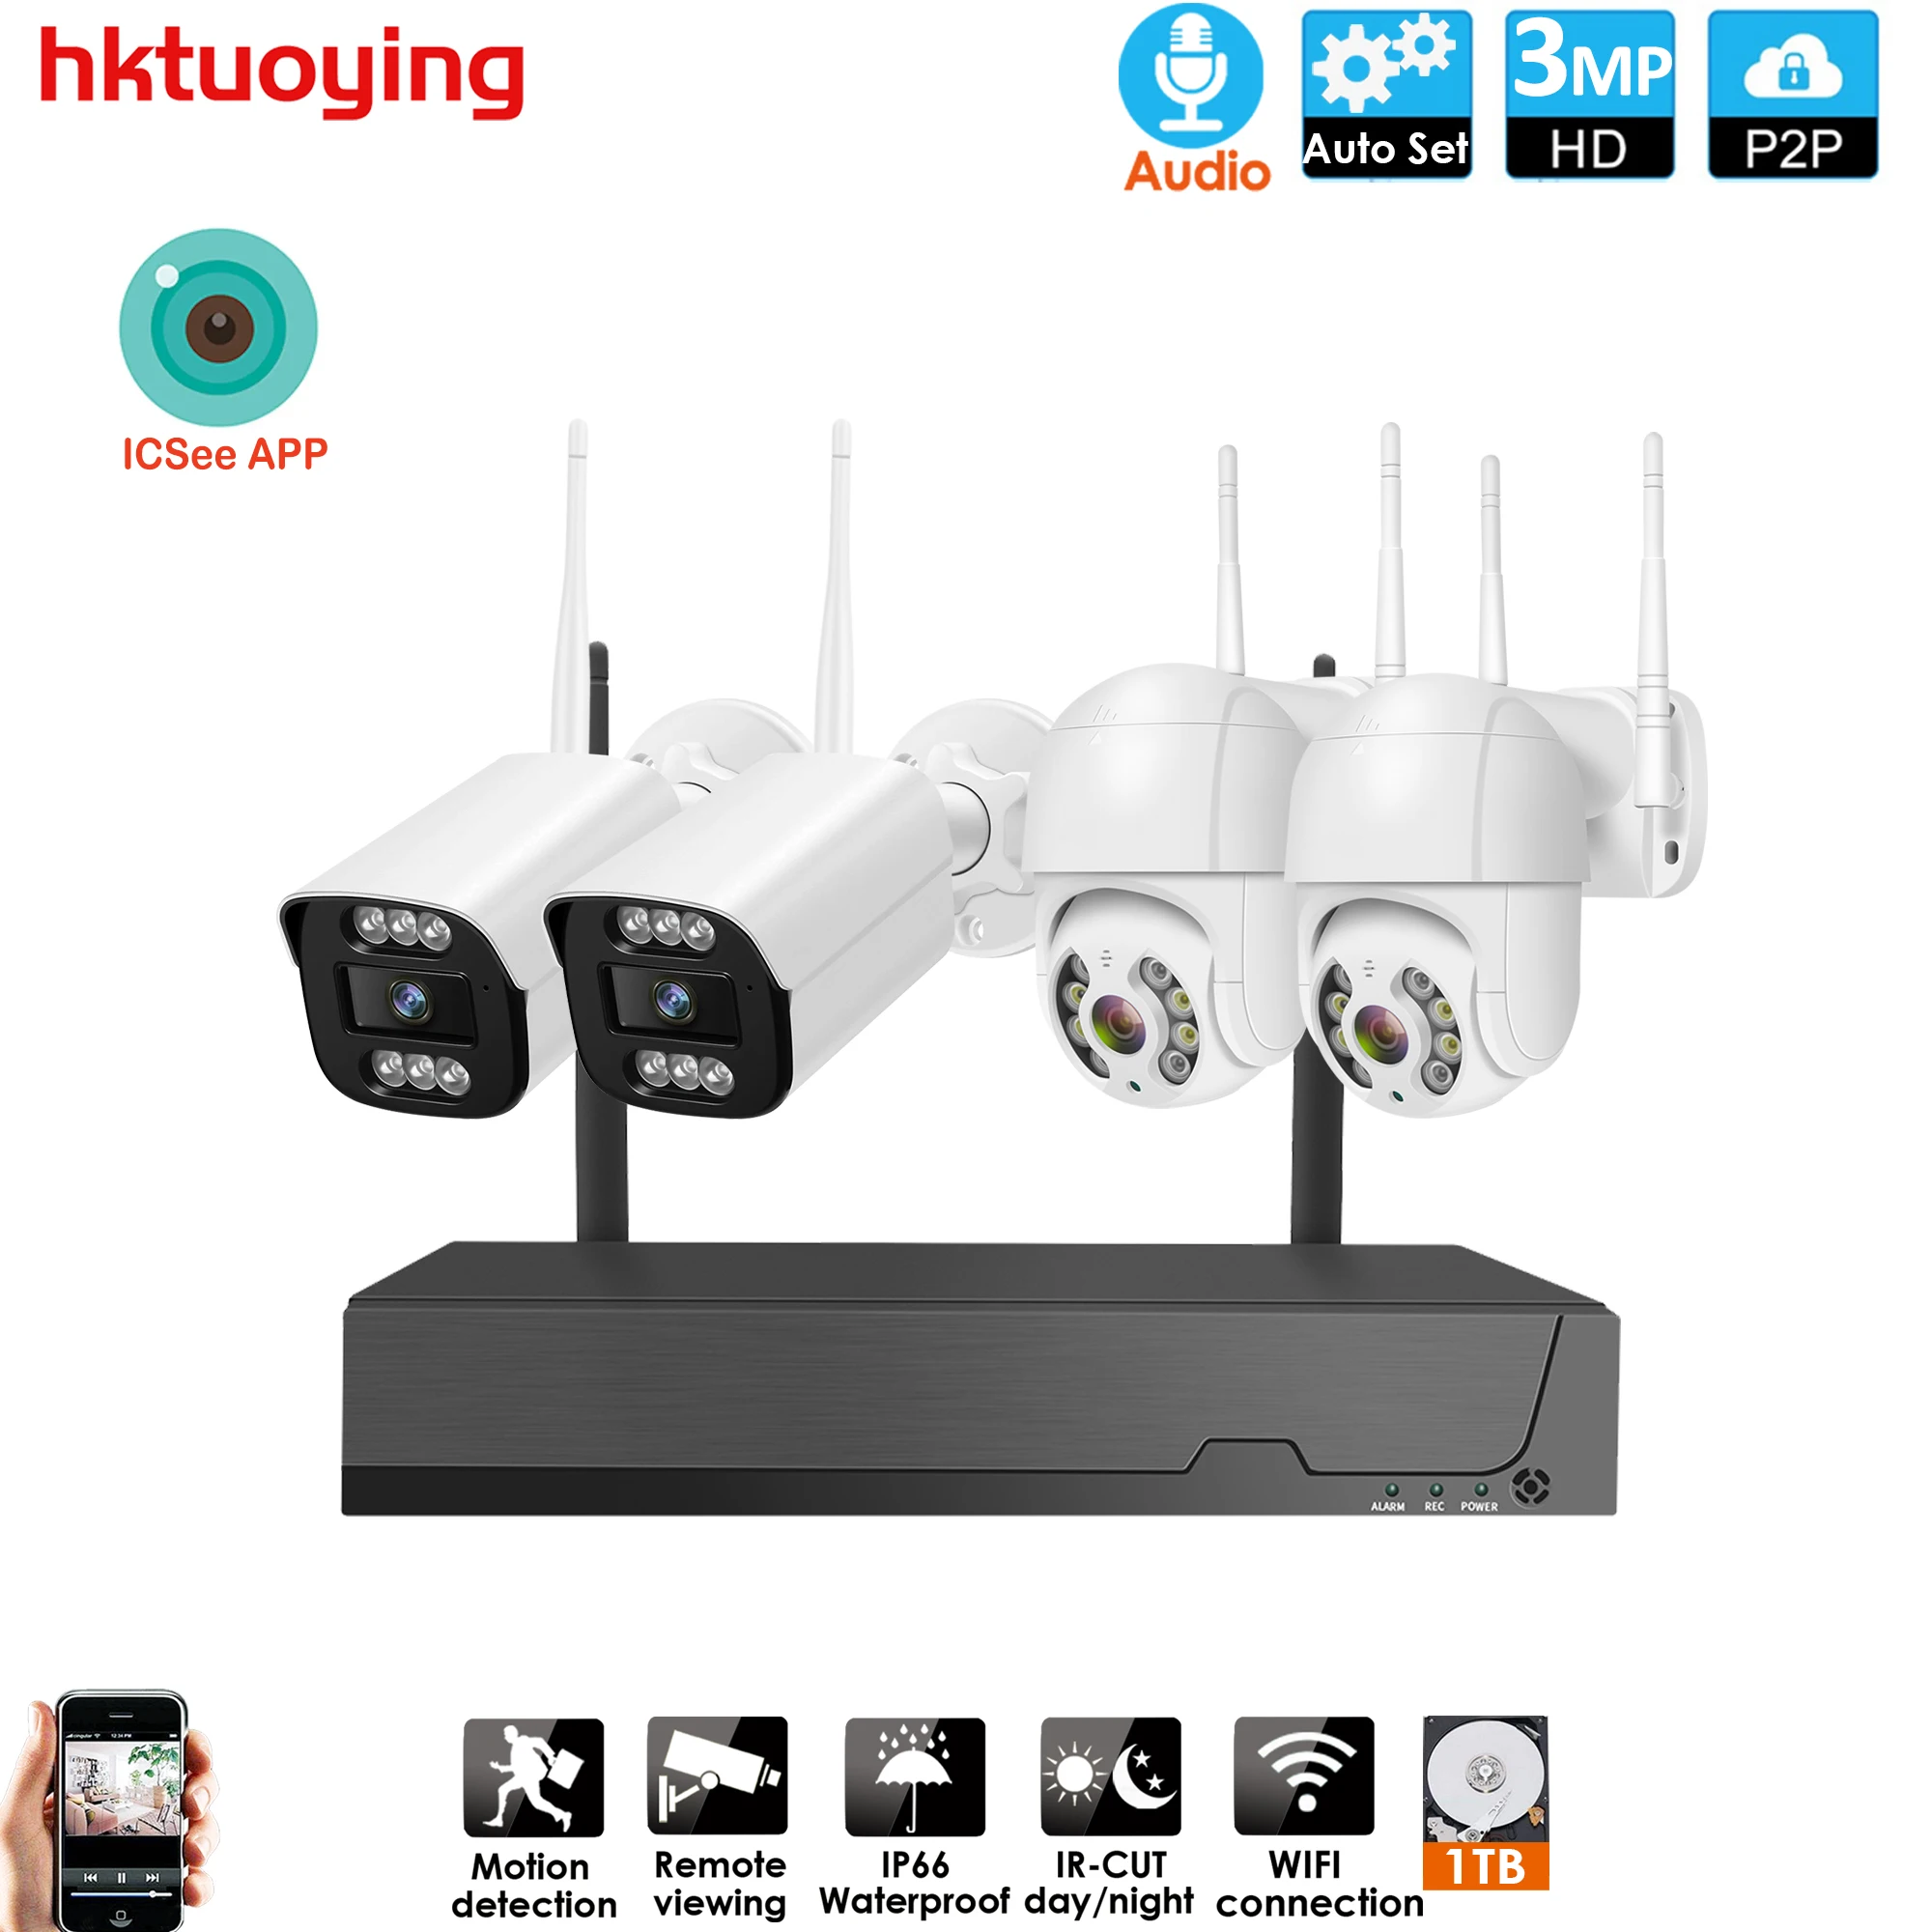 

XMEYE 4CH Audio CCTV System Wireless 3MP NVR Outdoor Indoor P2P Wifi IP Security Network Camera Surveillance Kit icsee